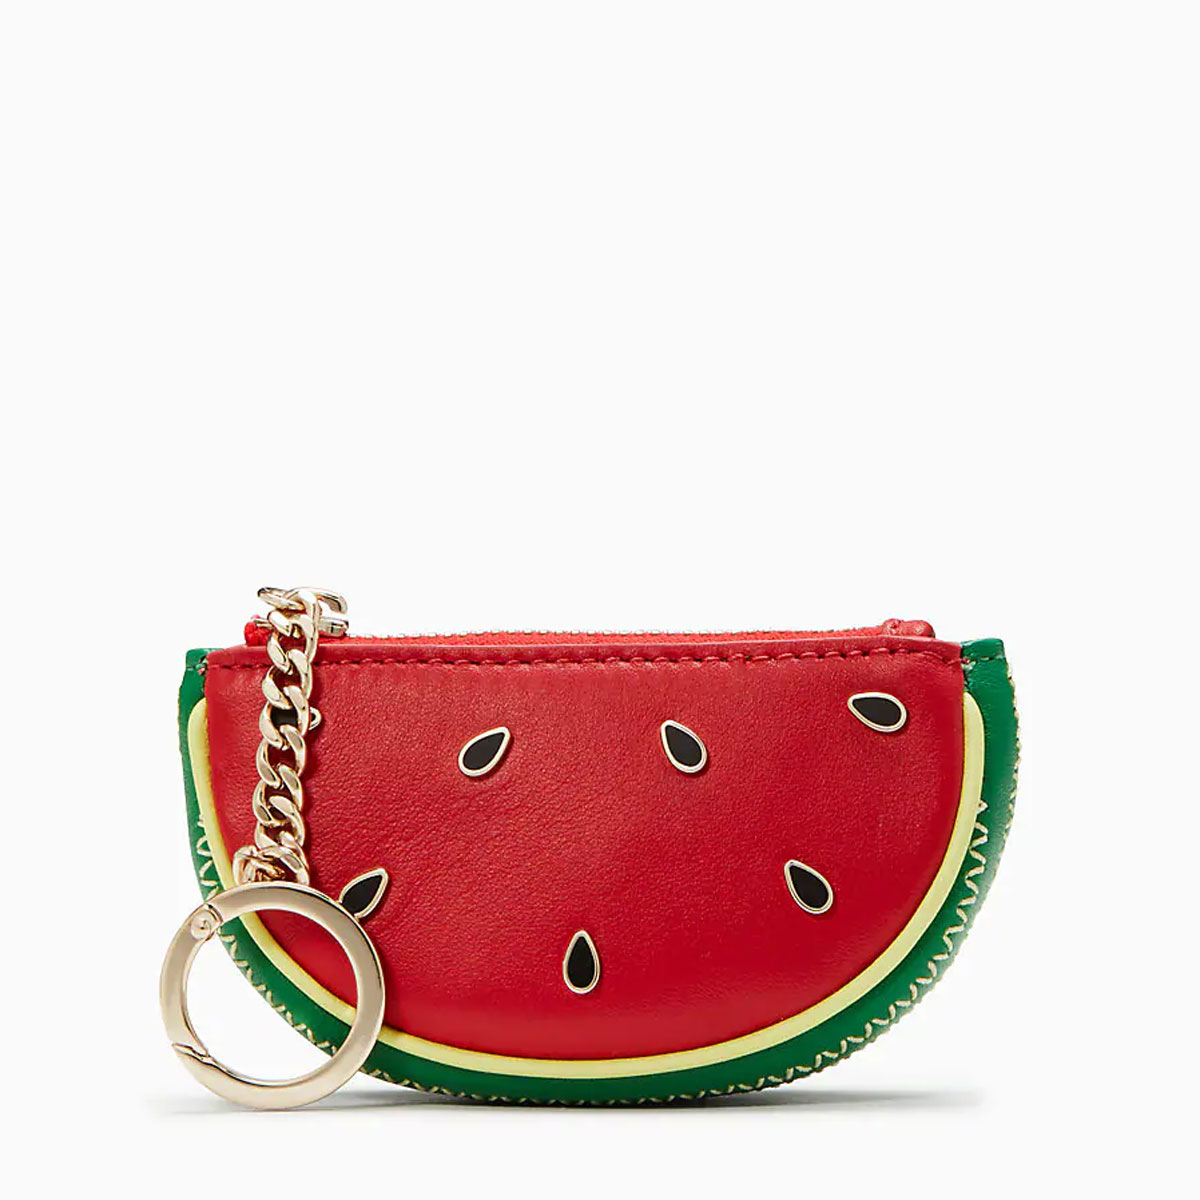 Looking for a Fun Summer Bag? Kate Spade's Got You Covered - PurseBlog